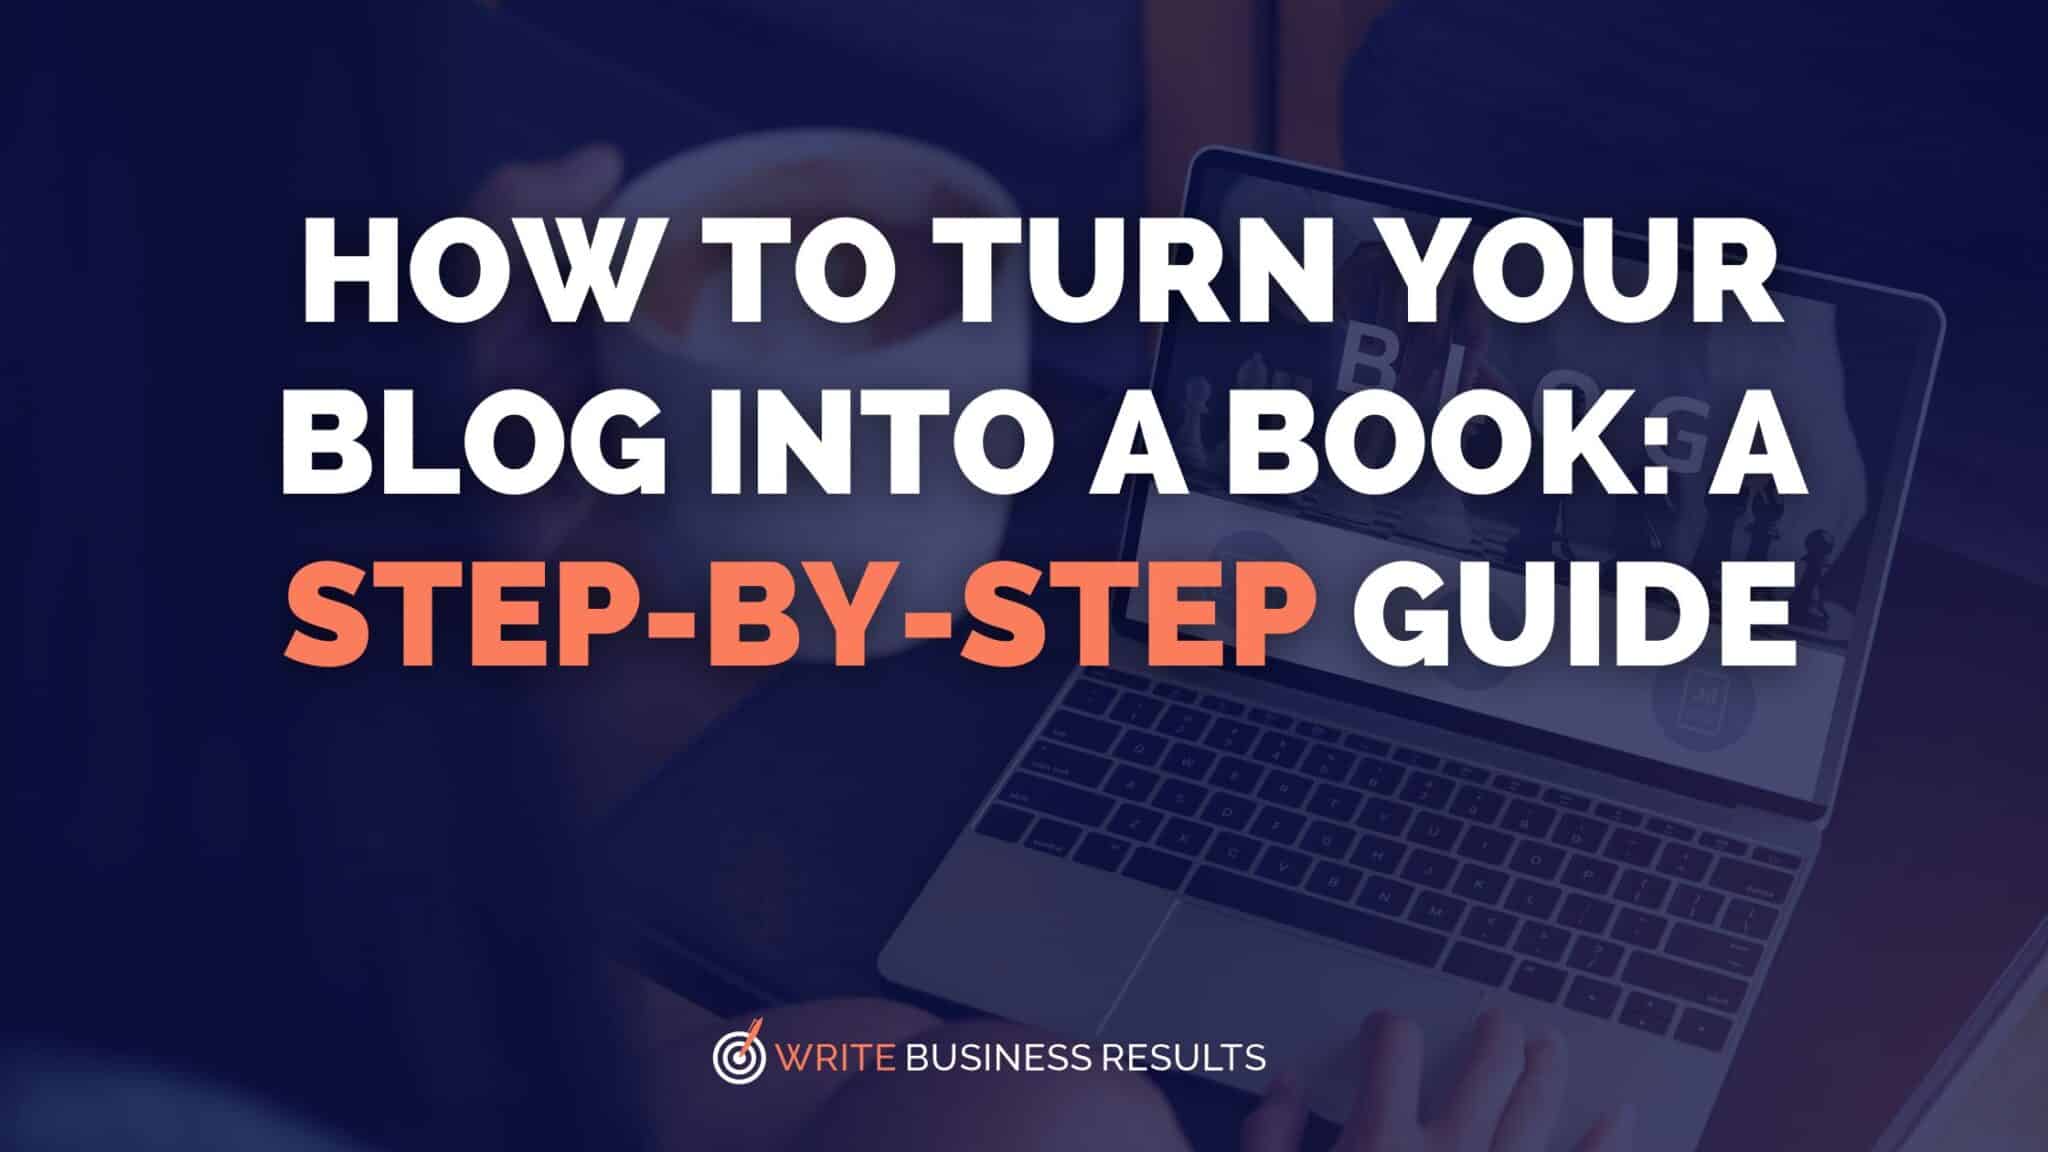 How to Turn Your Blog into a Book: A Step-by-Step Guide